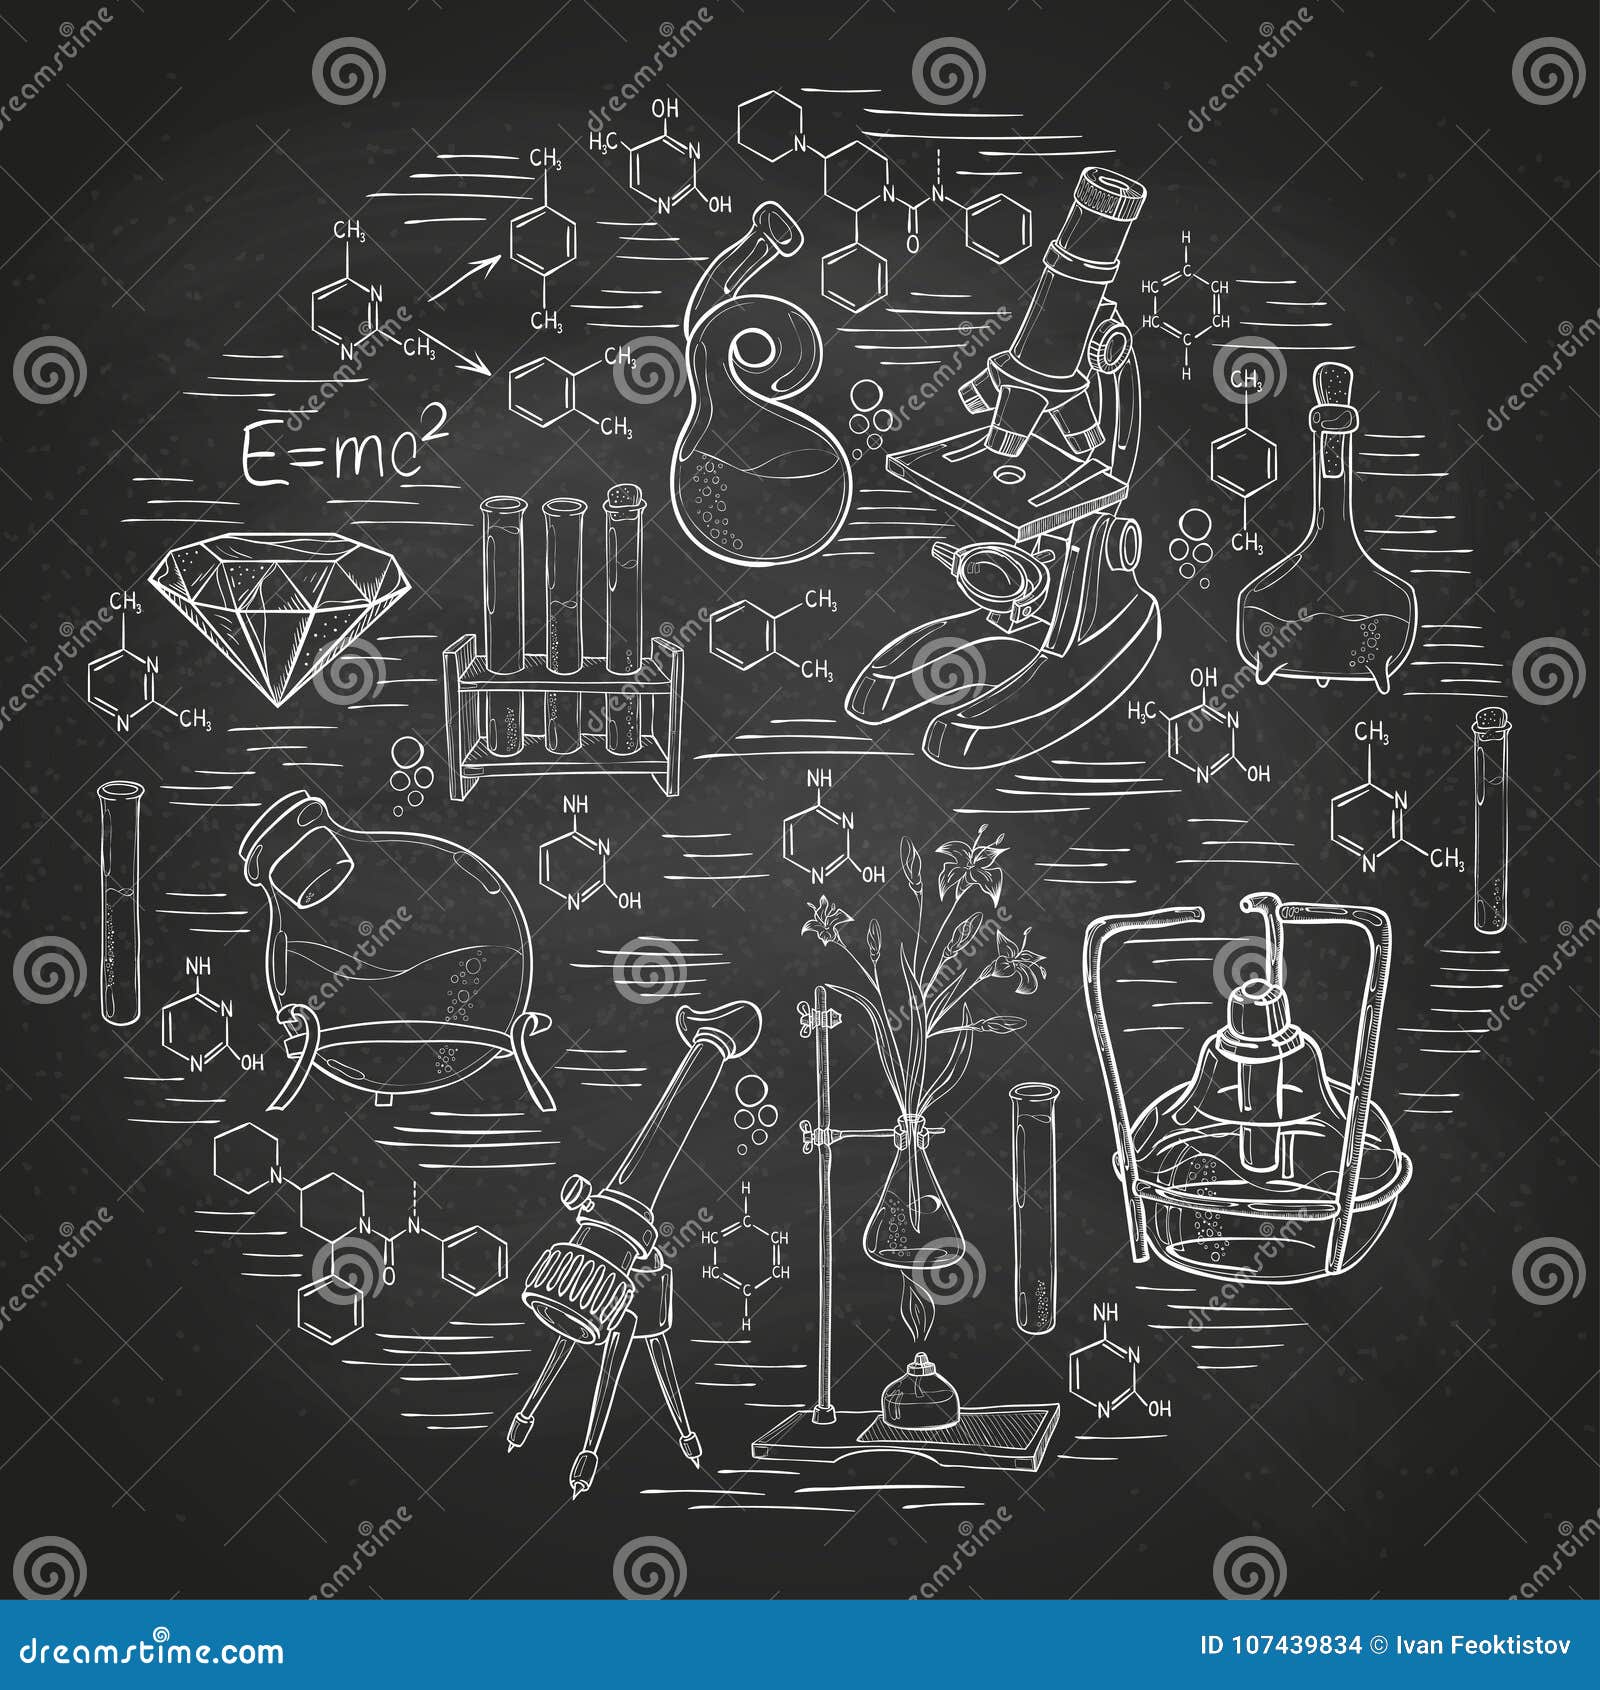 Image Details ING3819238961  Chemistry Sketch Icons Set  Chemistry  sketch icons set on checked exercise book background isolated vector  illustration